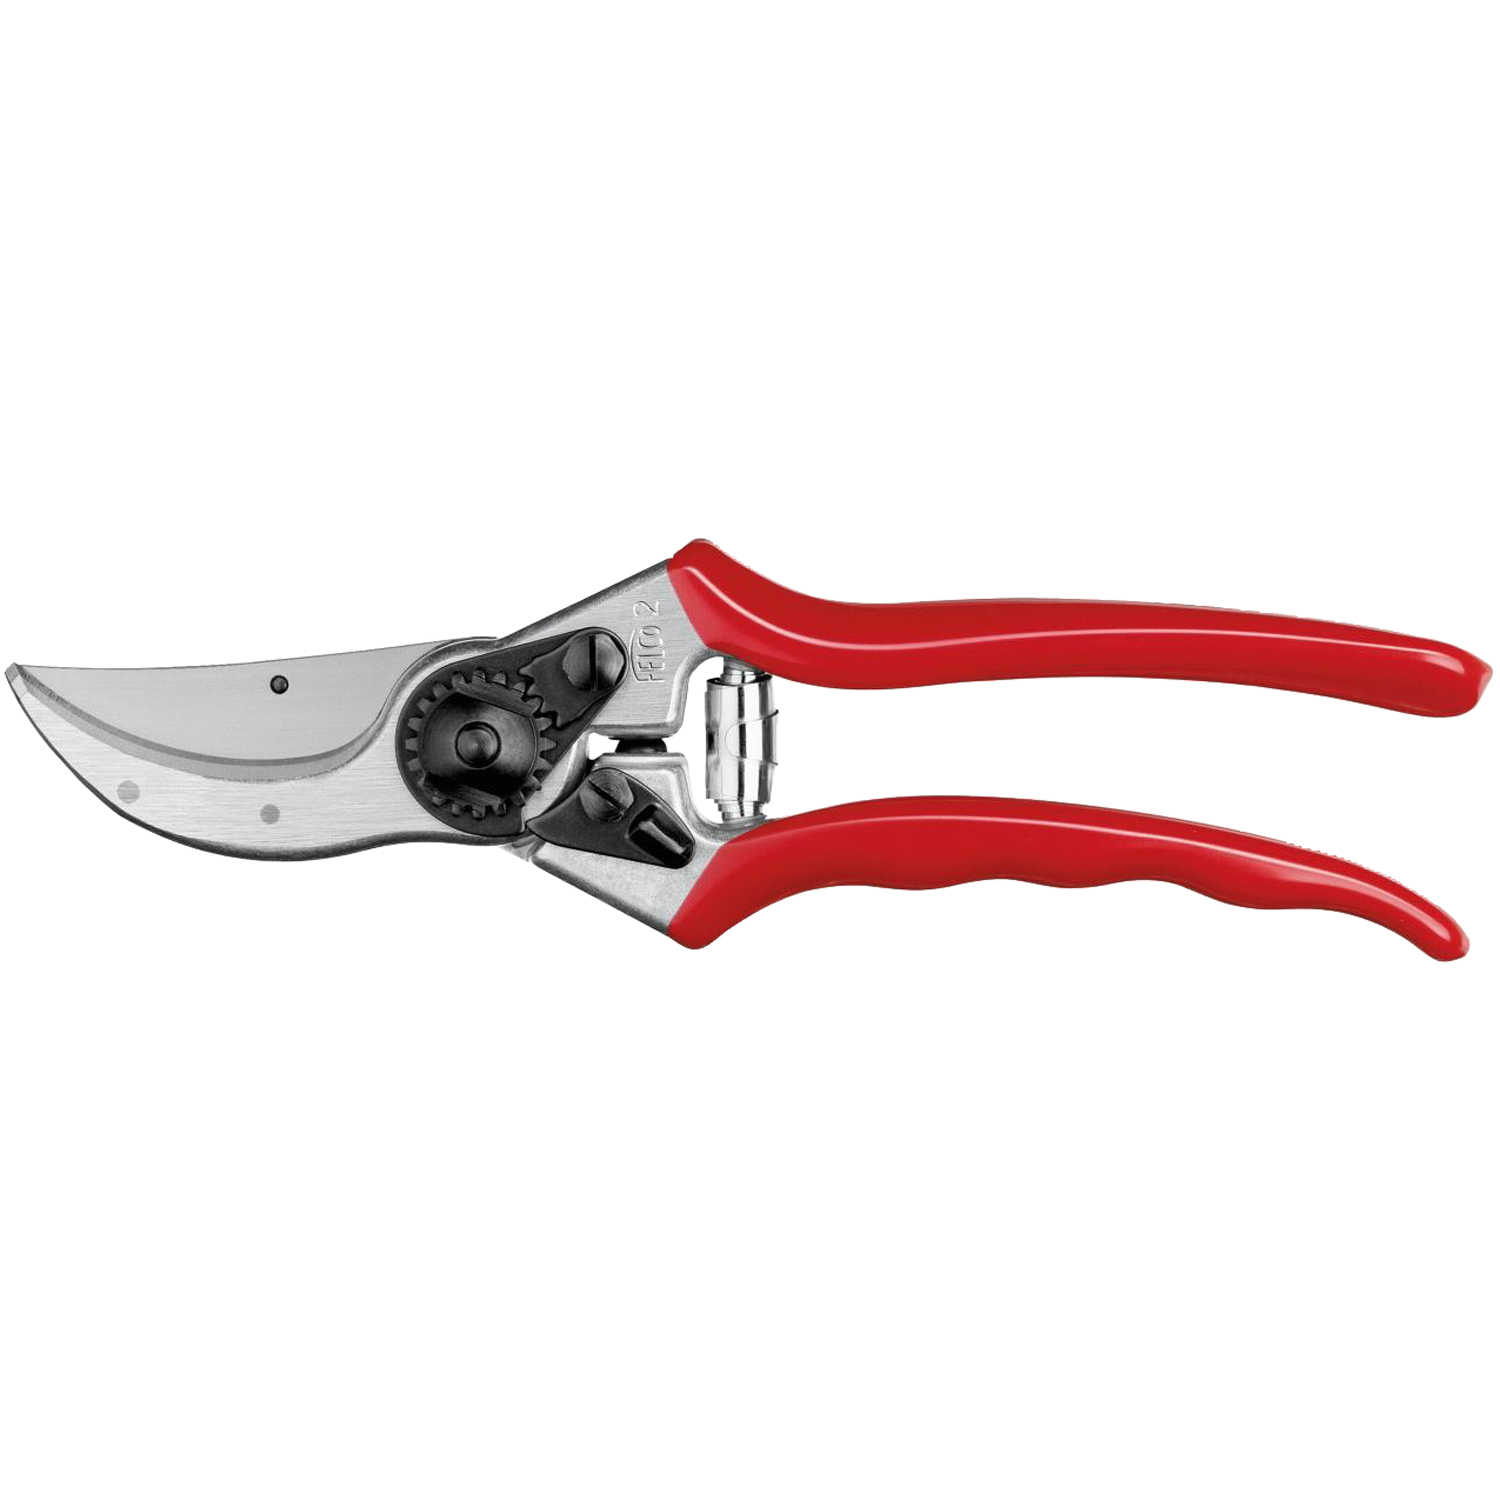 Hand Loppers Felco Model 2 Hand Pruner | Forestry Suppliers, Inc.